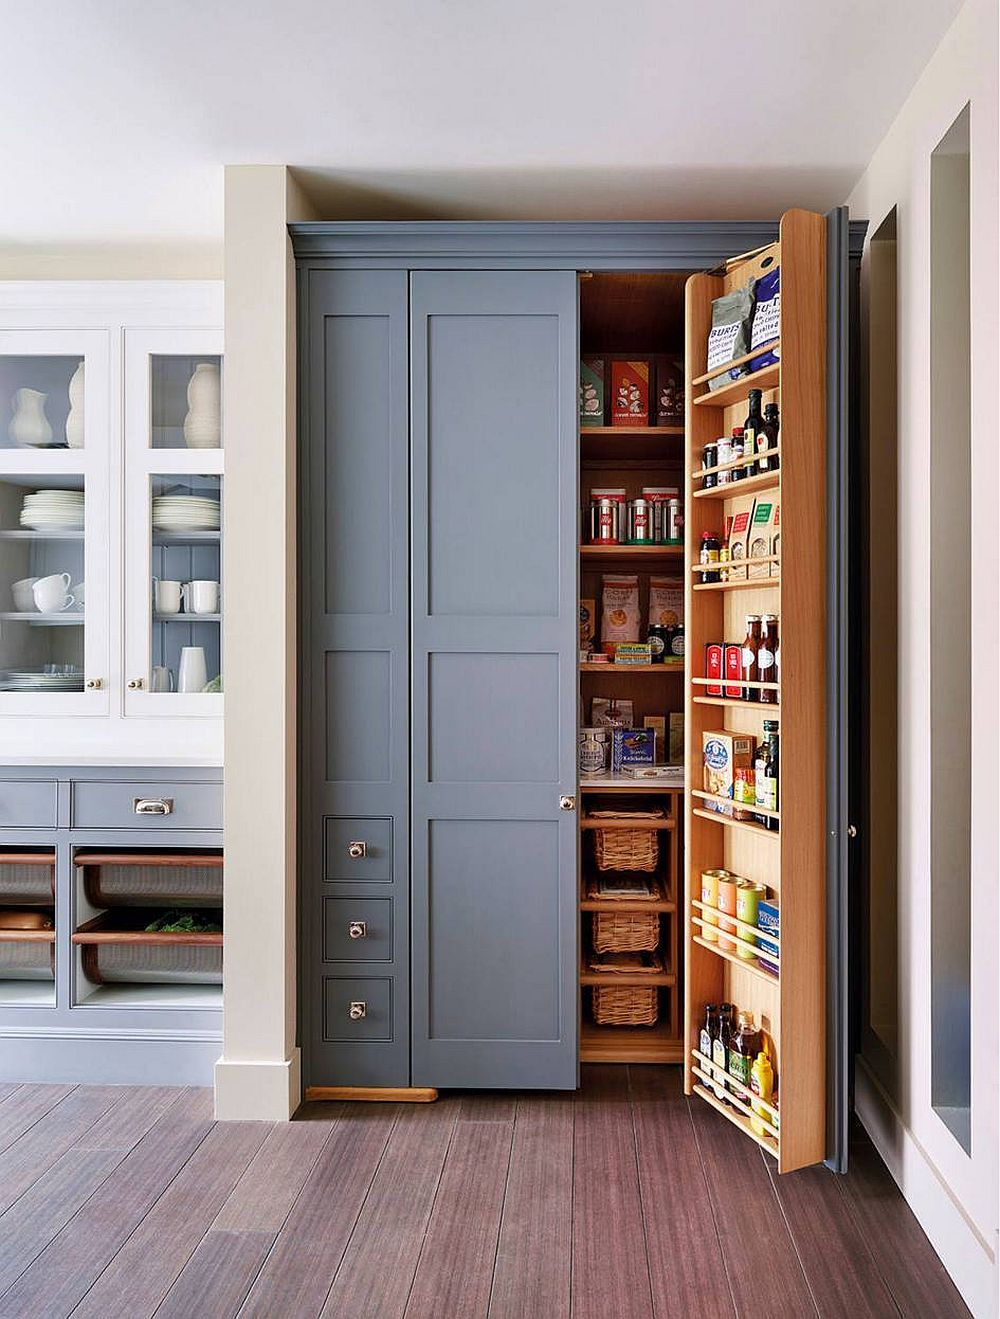 Pantry Designs For Small Kitchens
 10 Small Pantry Ideas for an Organized Space Savvy Kitchen